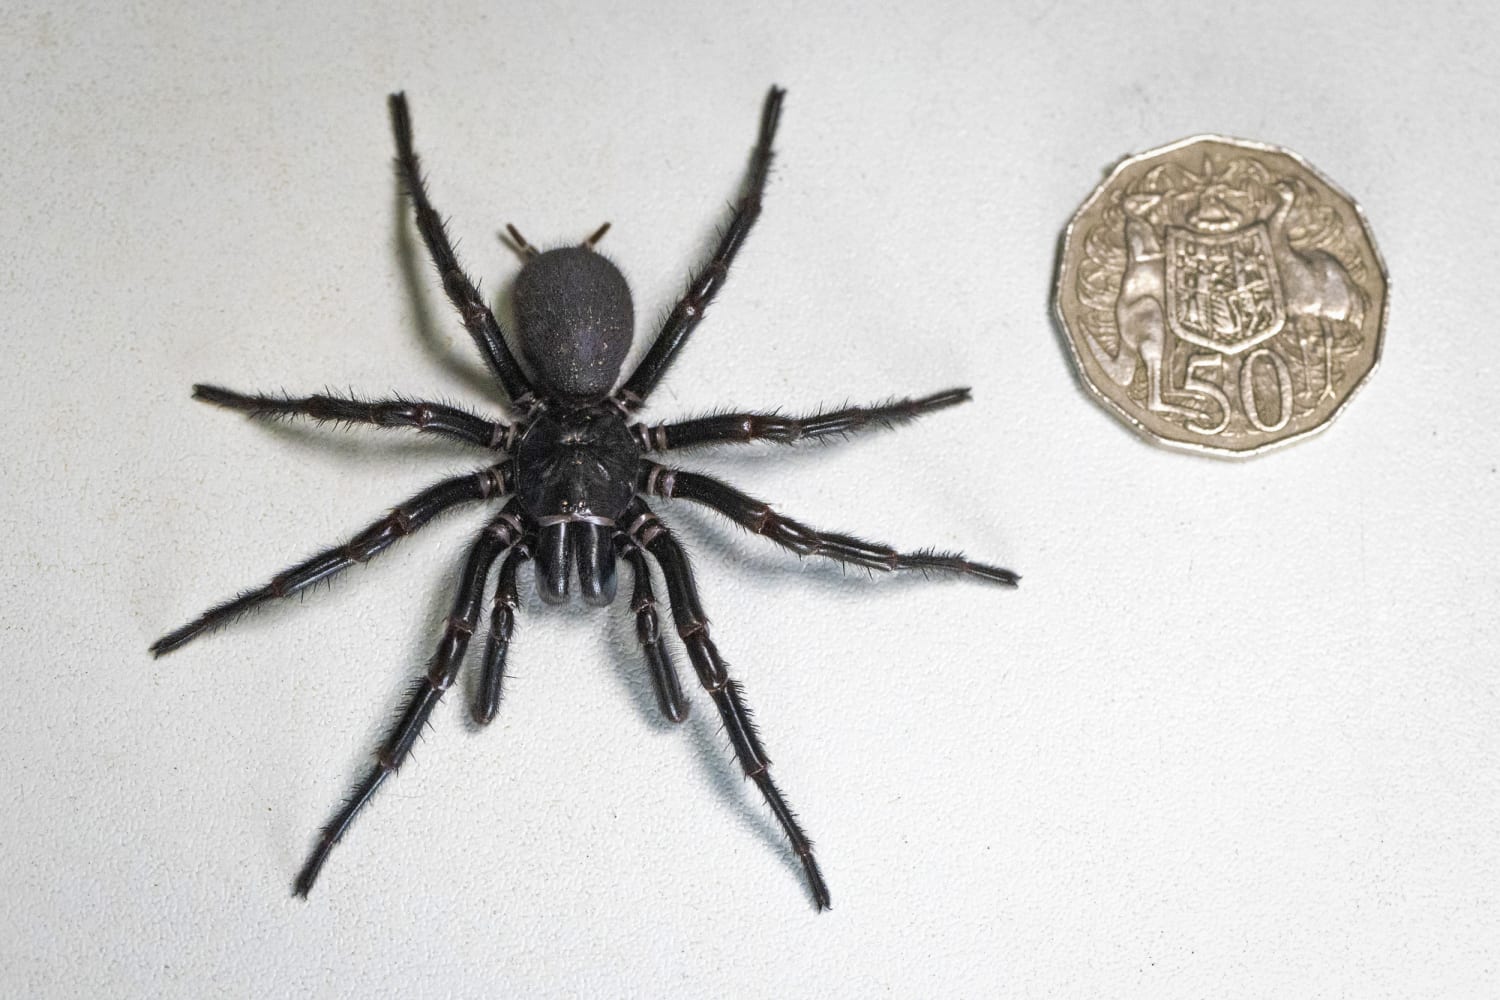 The largest male specimen of the world's most poisonous spiders was found in Australia